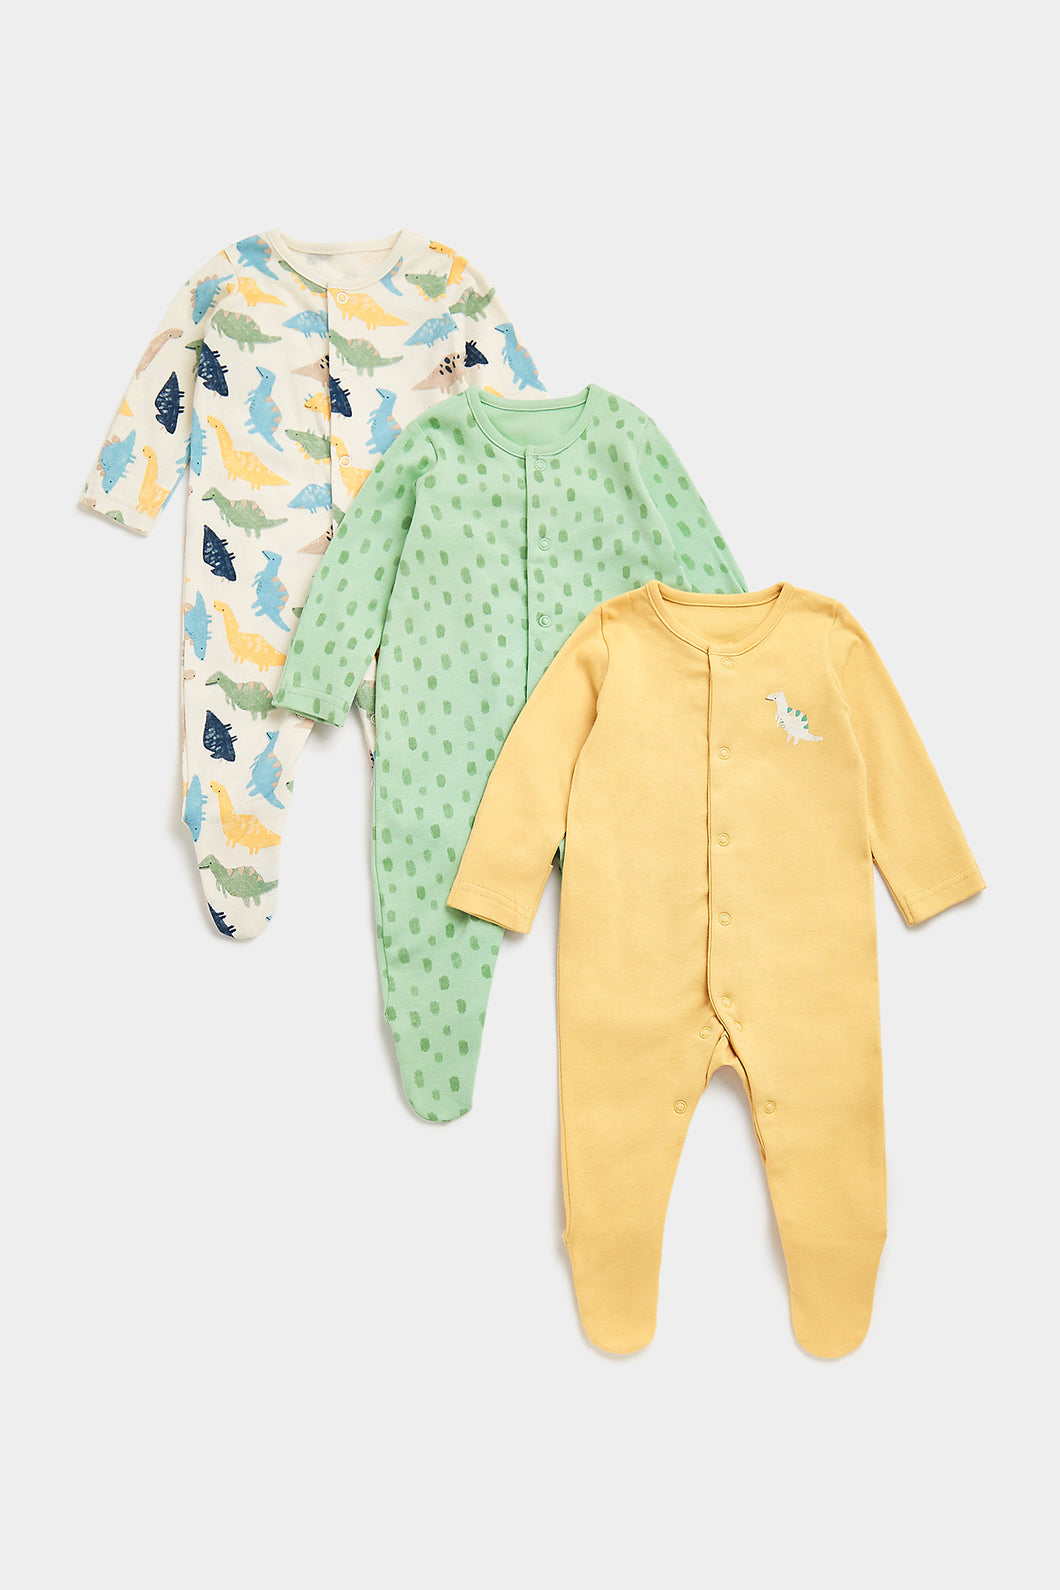 Mothercare Dinosaur Sleepsuits - 3 Pack